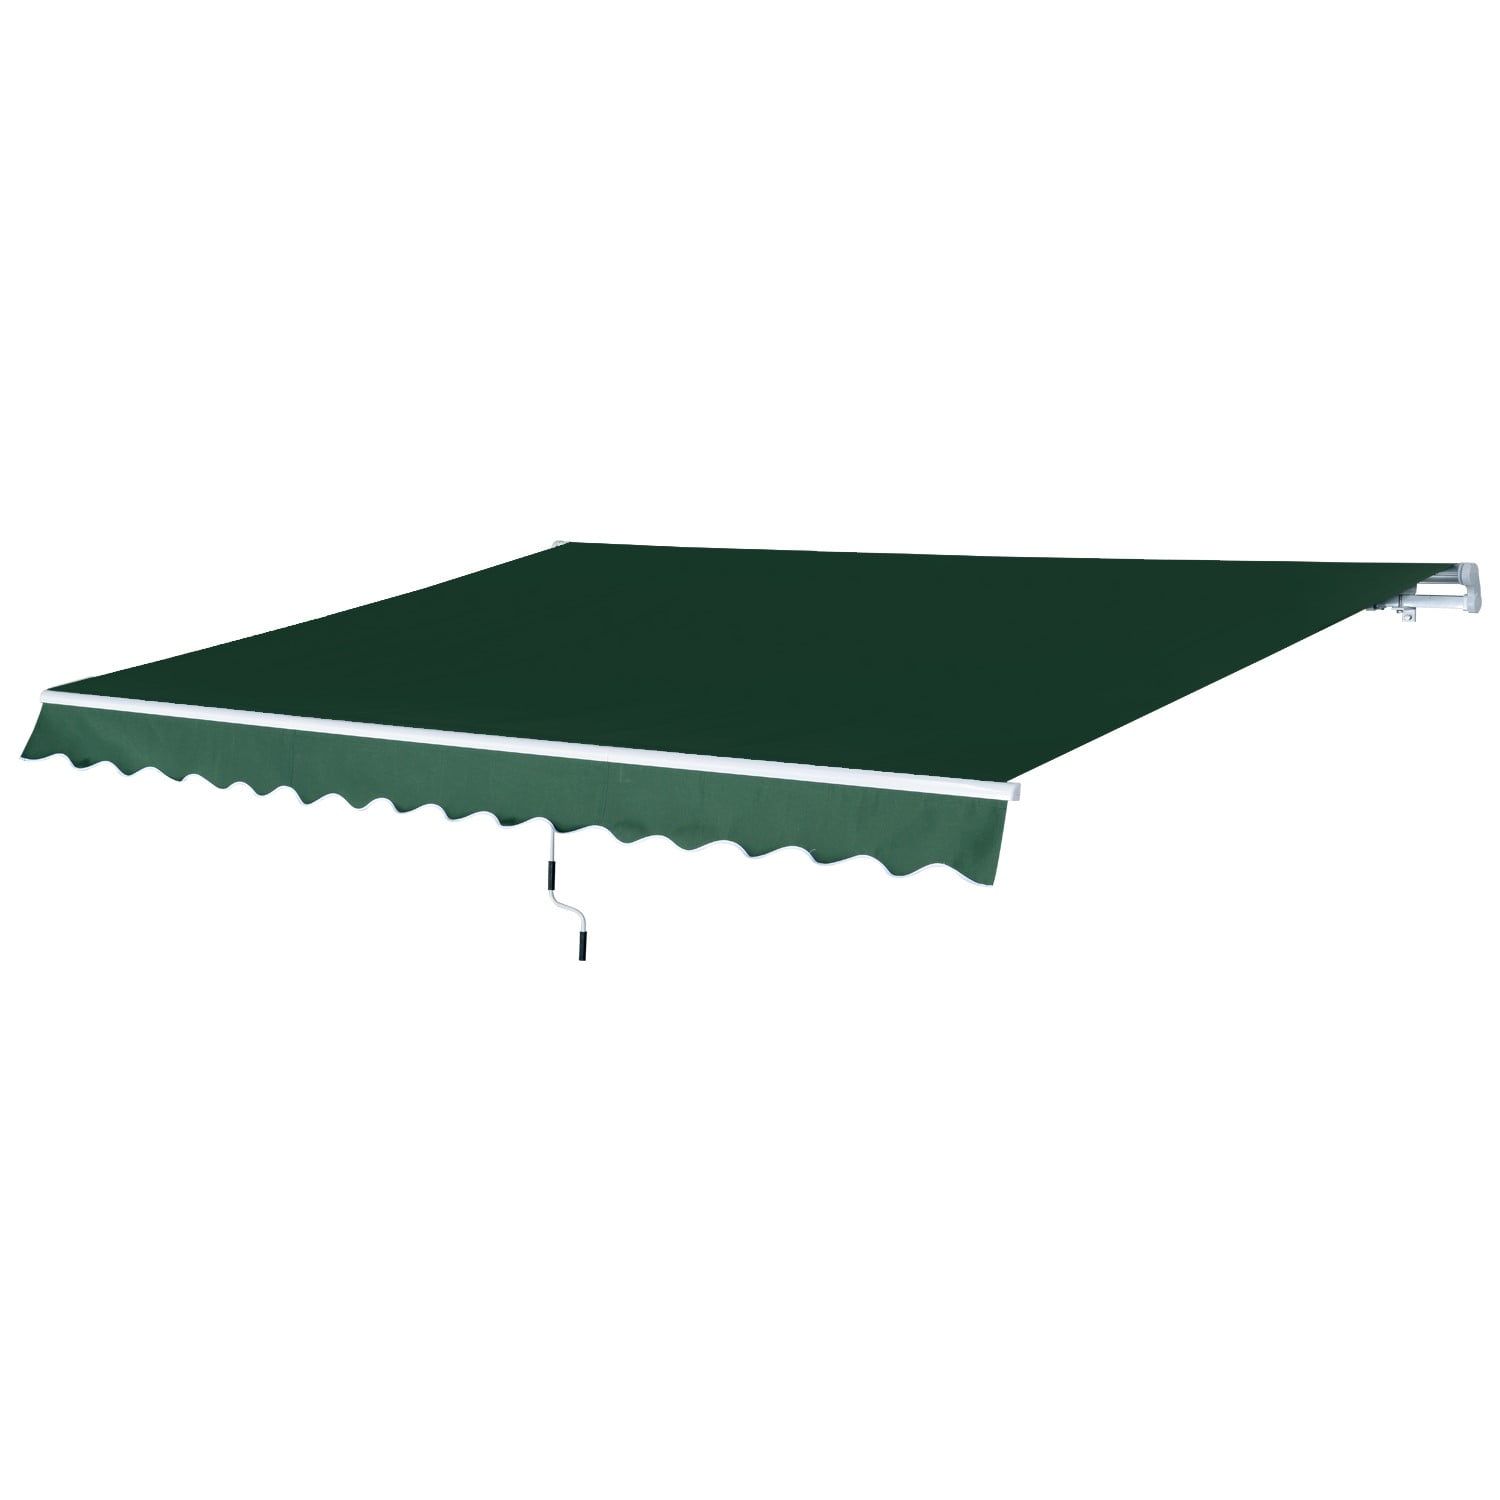 Outsunny 12' x 8' Patio Retractable Awning Manual Exterior Sun Shade Deck Window Cover, Green